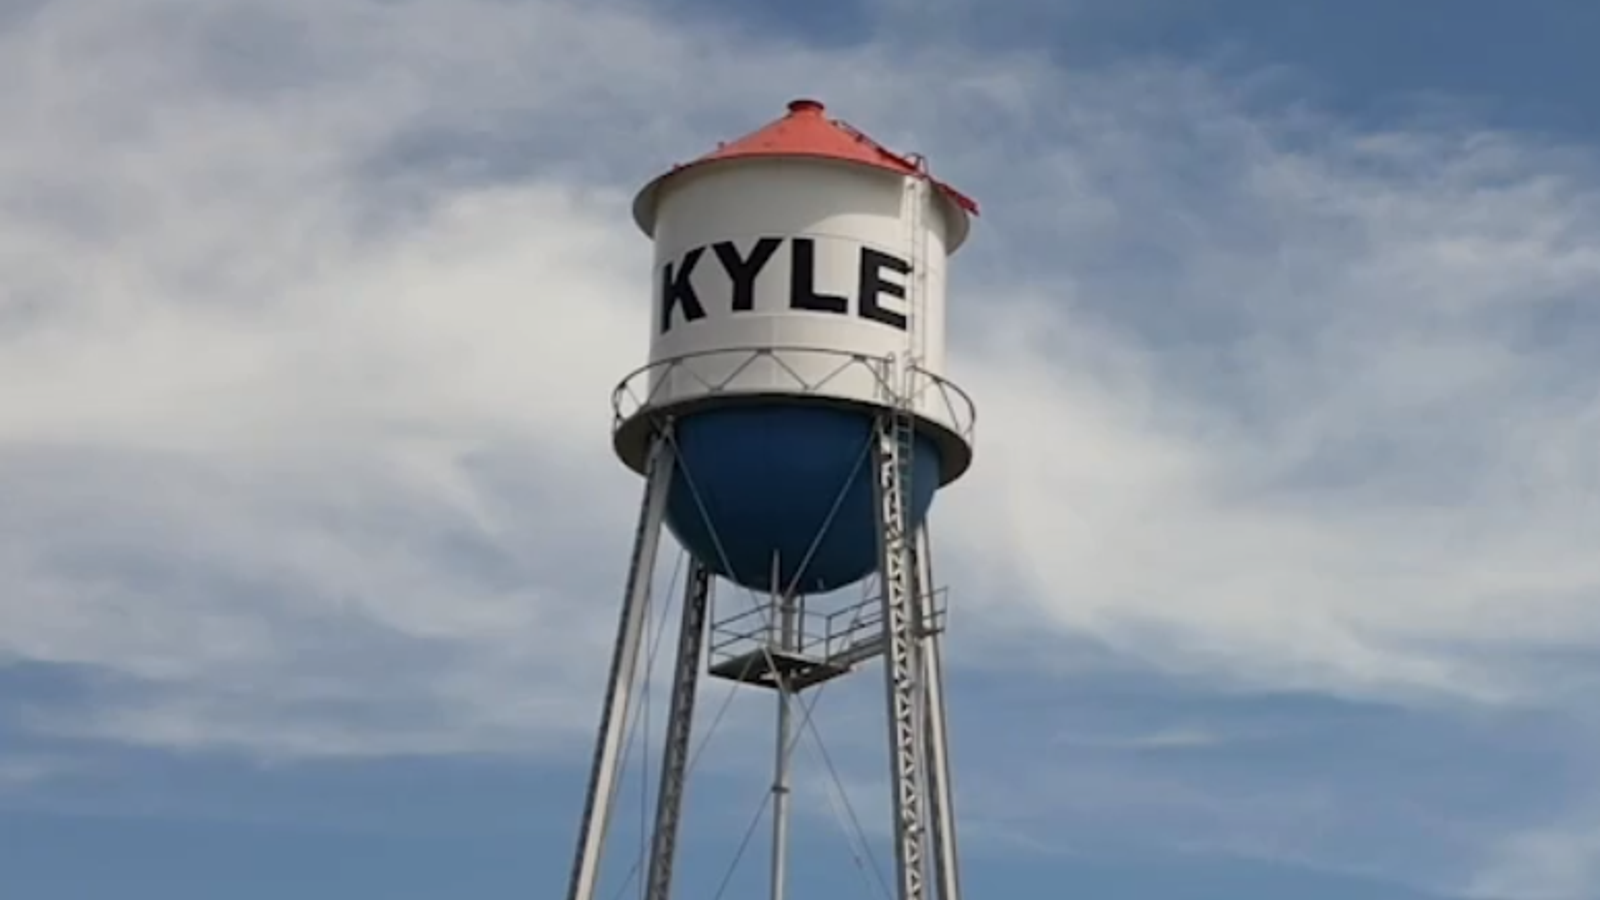 The battle of Kyle and Ivan: How a city in Texas is aiming to claim a world record for gathering the most number of Kyles